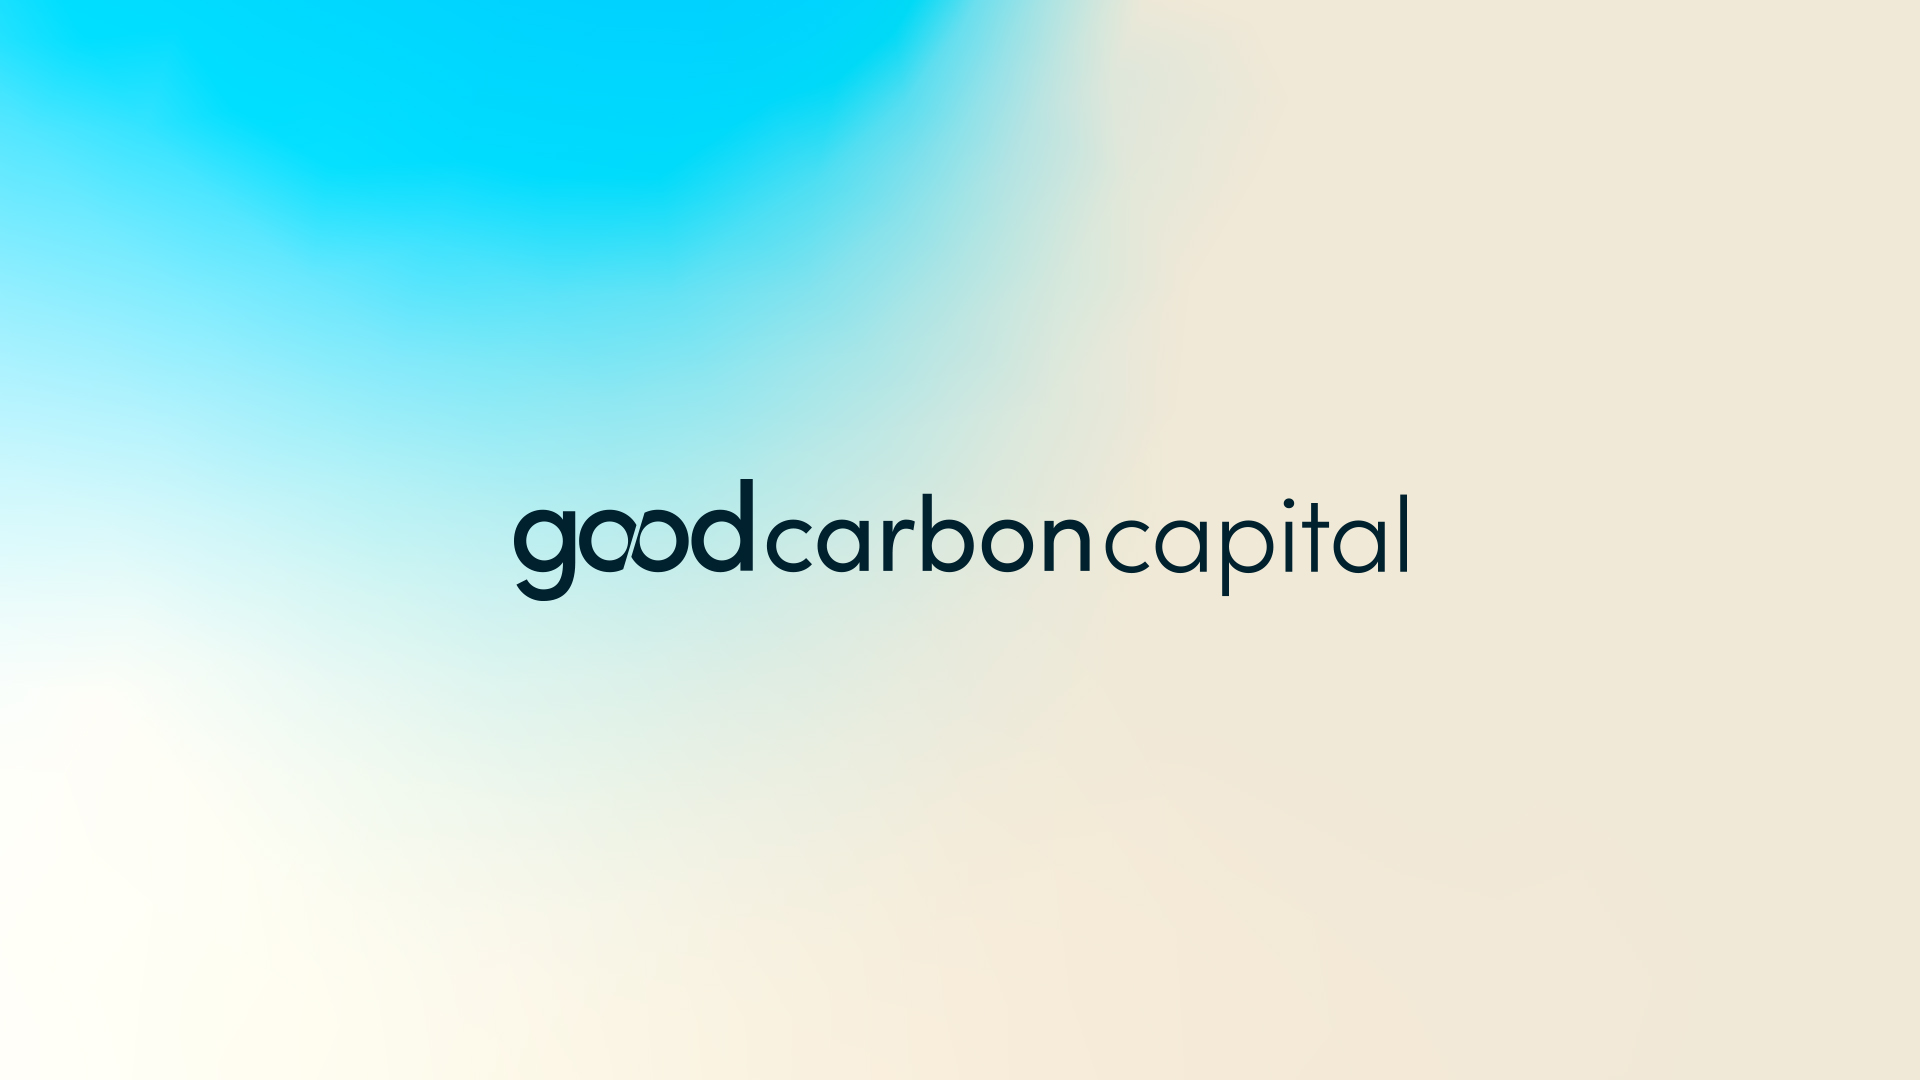 Goodcarbon Capital (GCC) Brand Identity – Connecting Conscious Business to Real Change